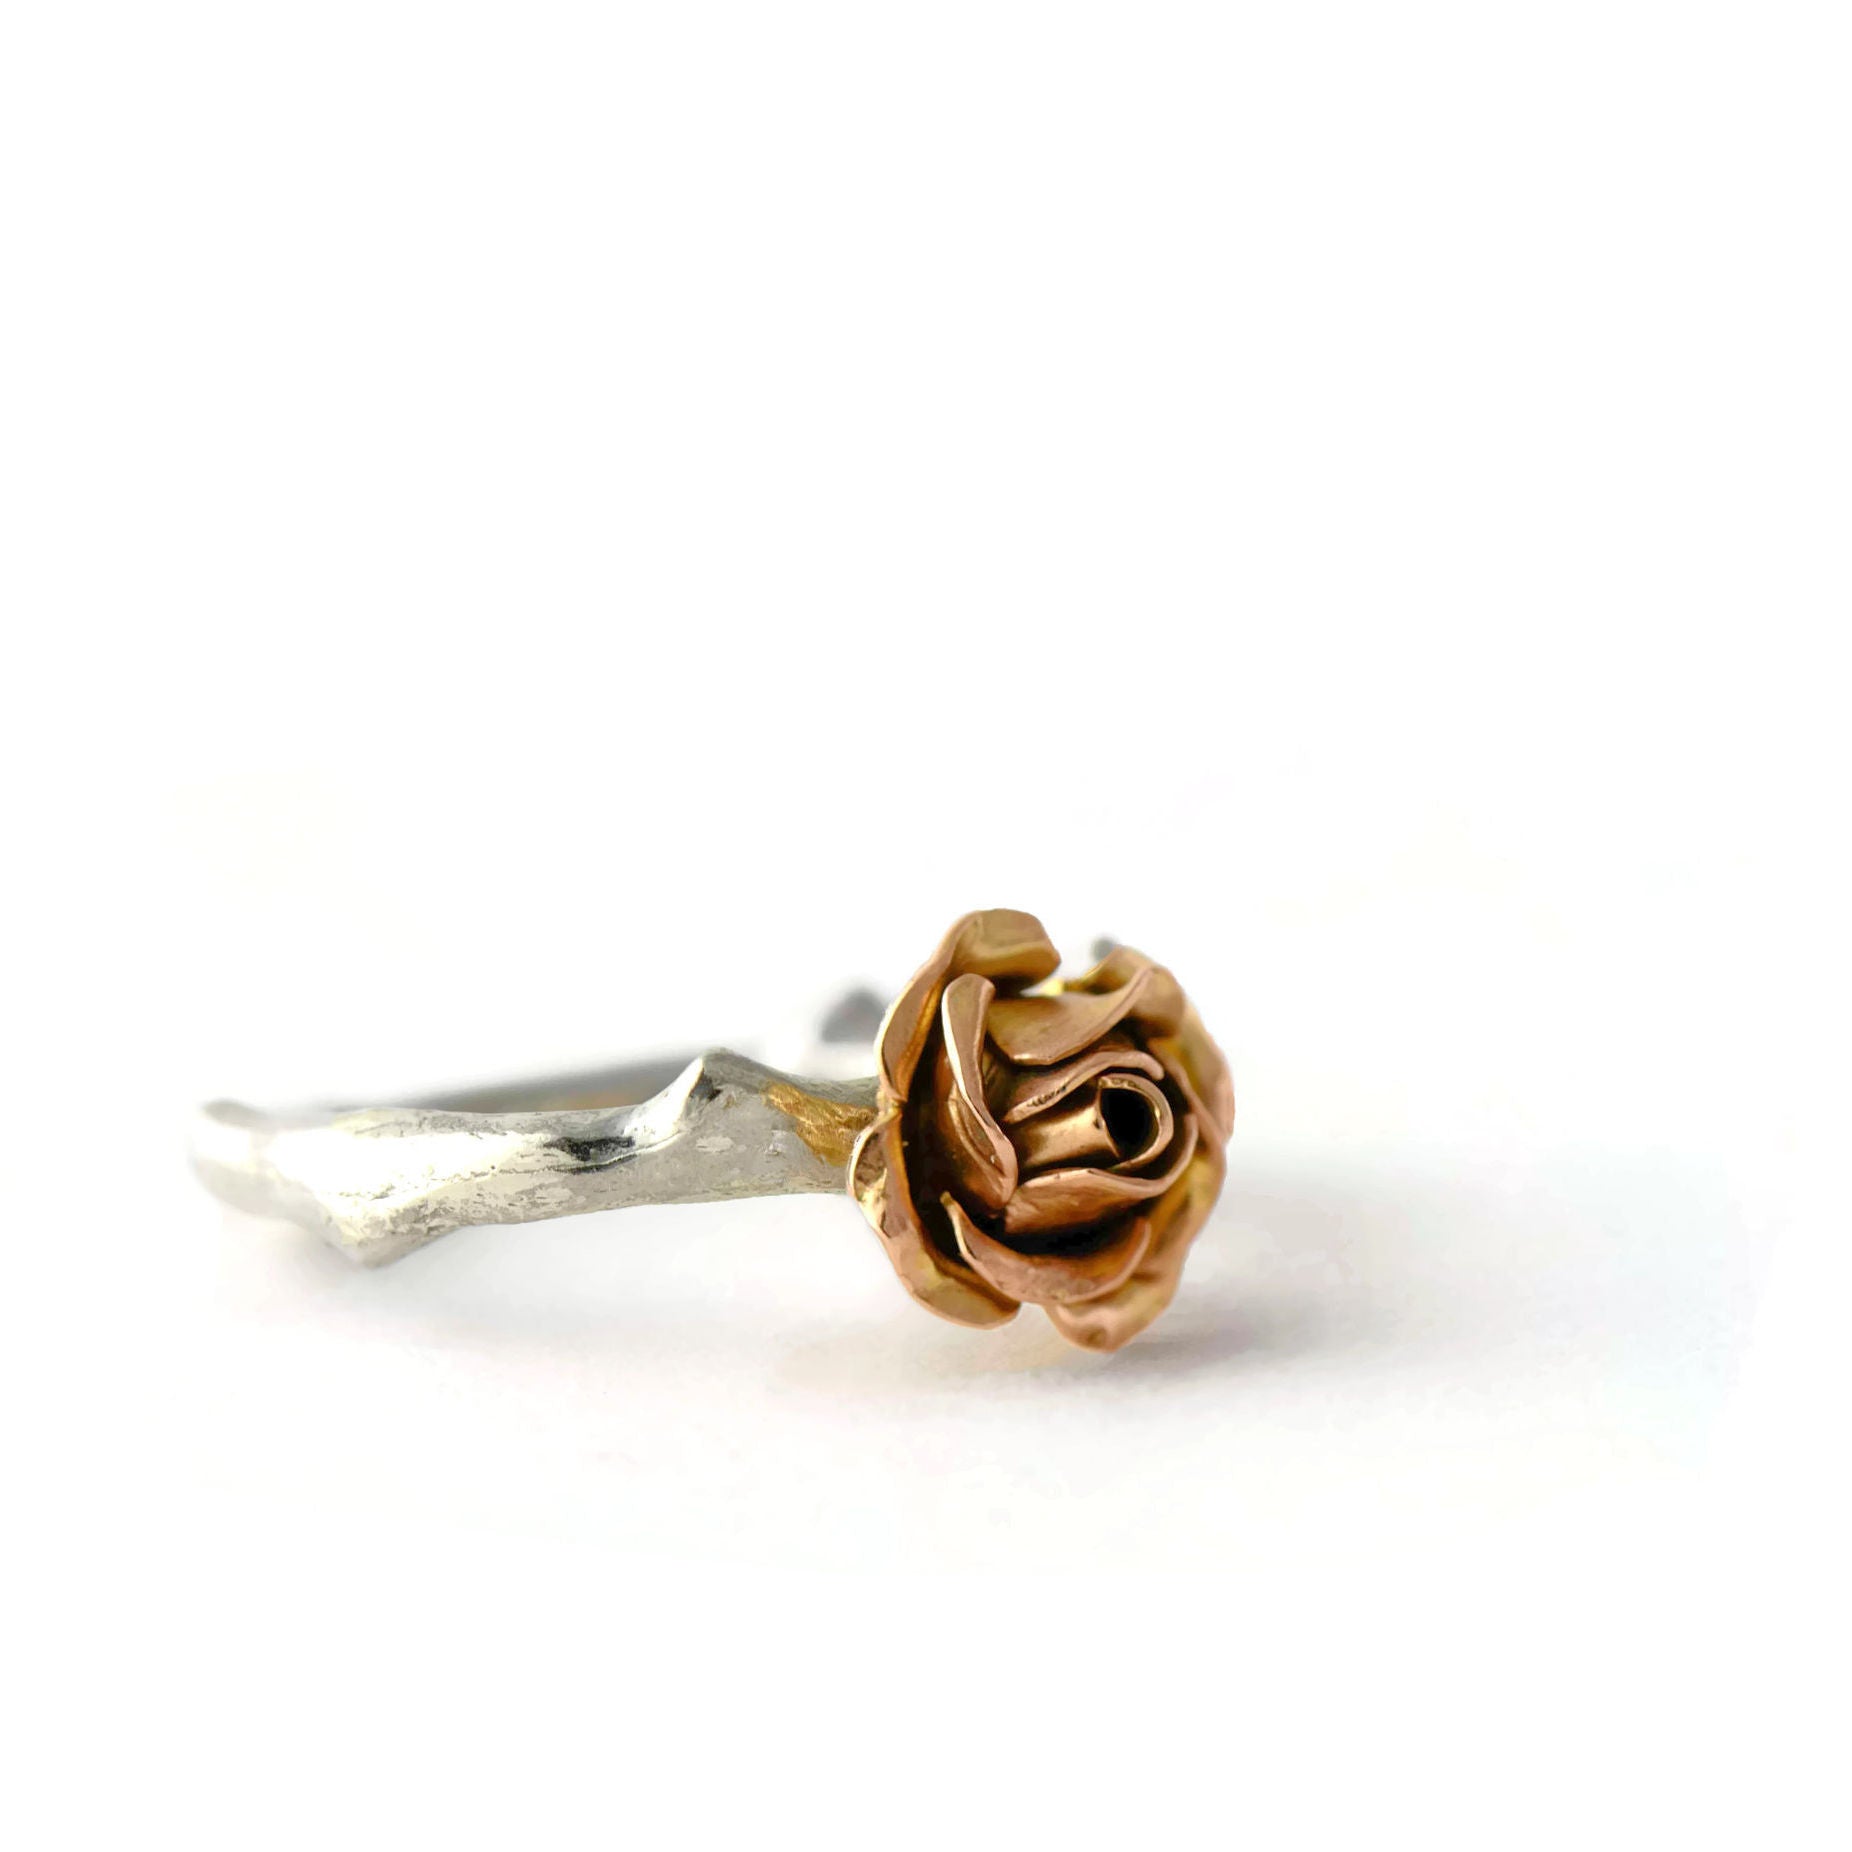 Yellow rose ring, an engagement ring made with mix metal